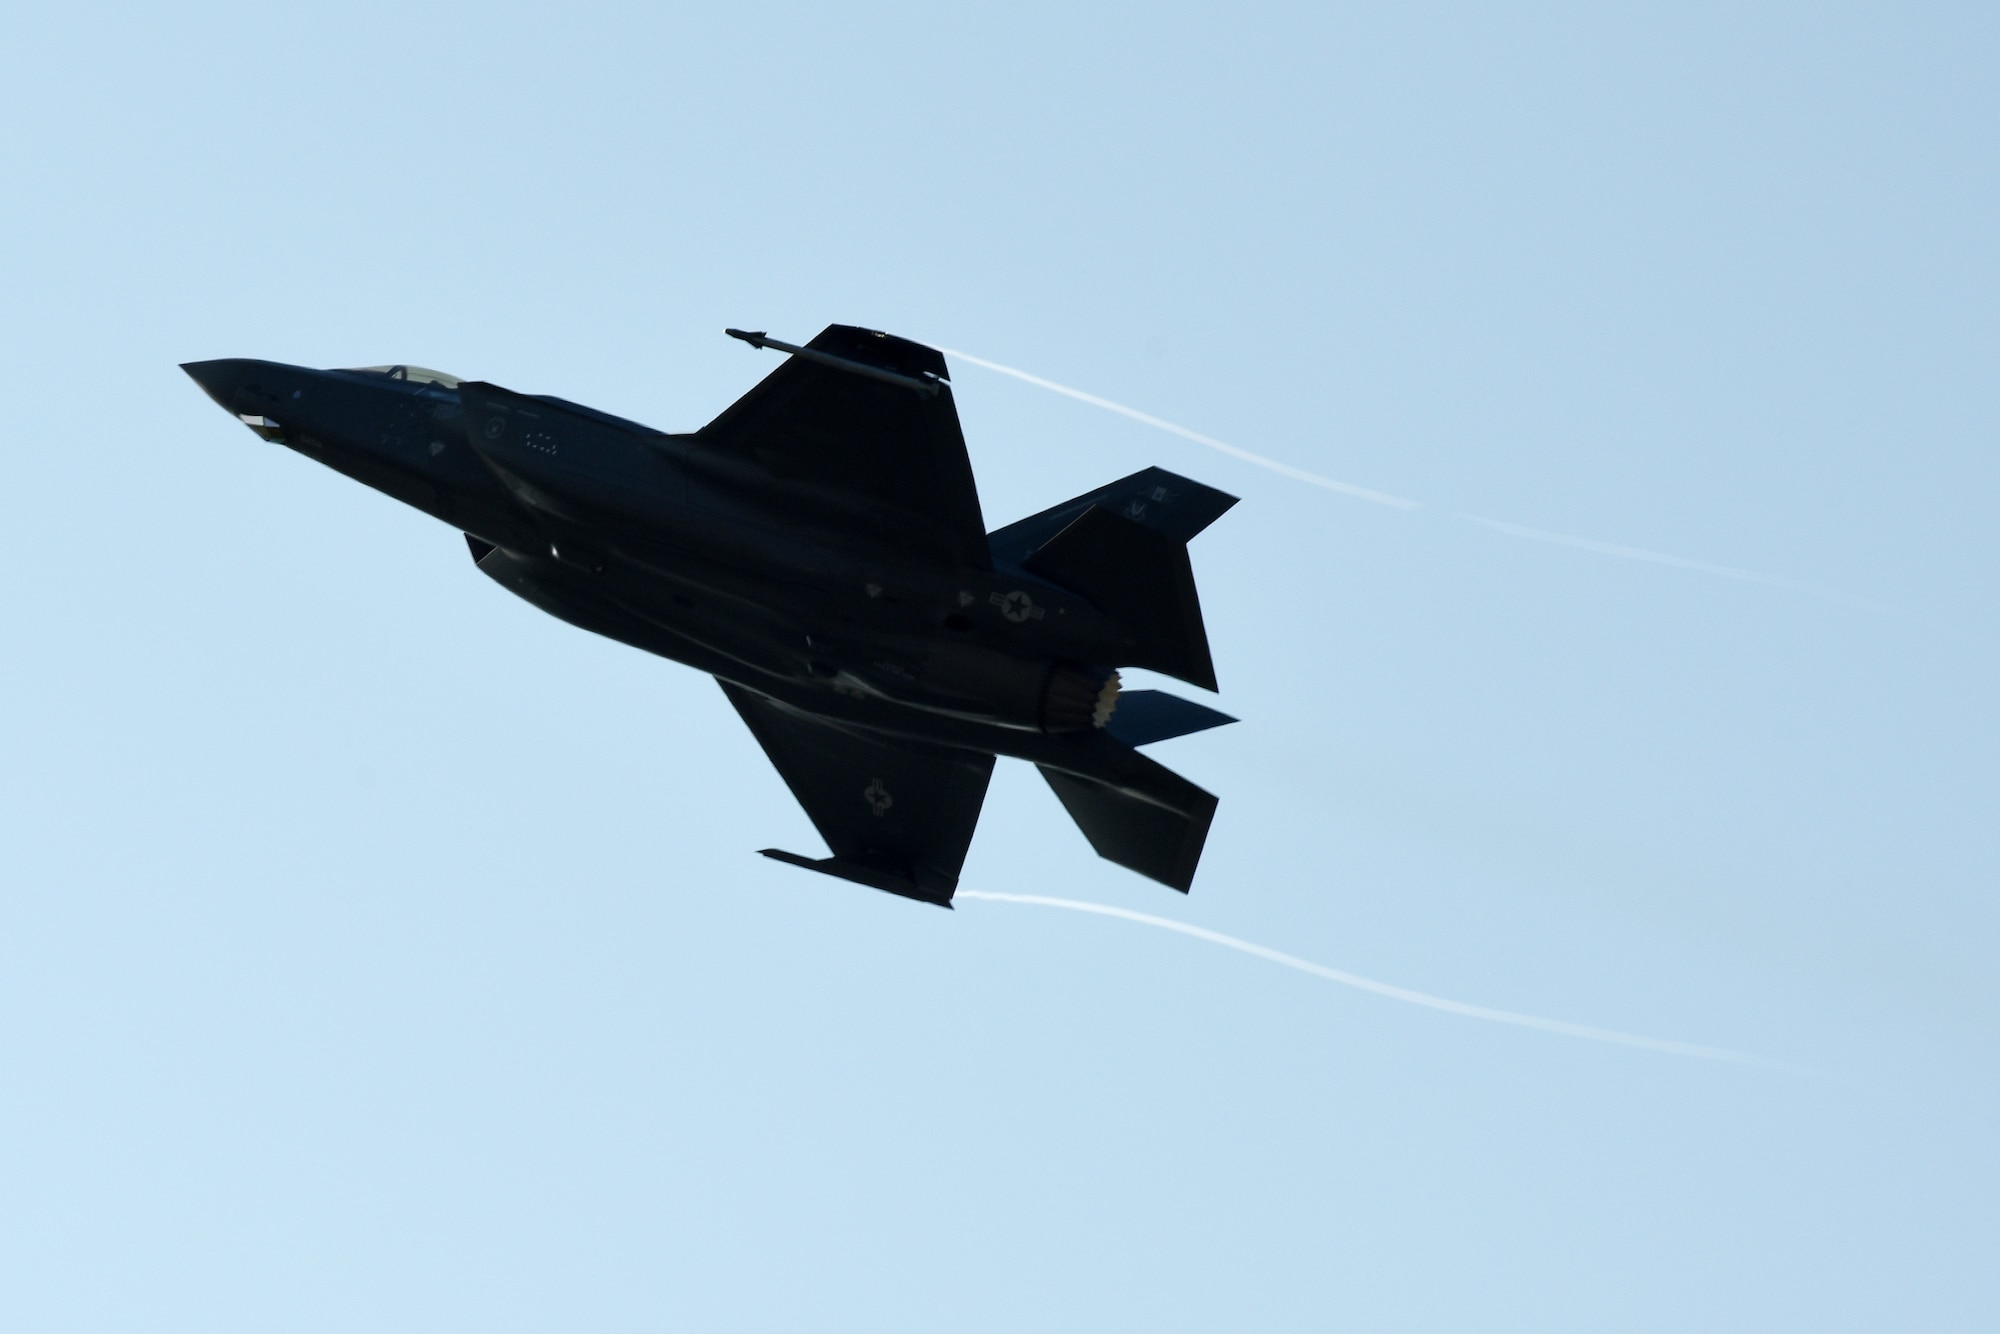 An F-35A Lightning II fighter jet from the 388th Fighter Wing at Hill Air Force Base, Utah, takes off during Astral Knight 2019 on June 3, 2019, at Aviano Air Base, Italy. The U.S. Air Force has deployed one squadron of F-35A Lightning II fighter jets, Airmen, and associated equipment to Aviano Air Base, Italy, from the 388th and 419th Fighter Wings, at Hill AFB, Utah. (U.S. Air Force photo by Tech. Sgt. Jim Araos)